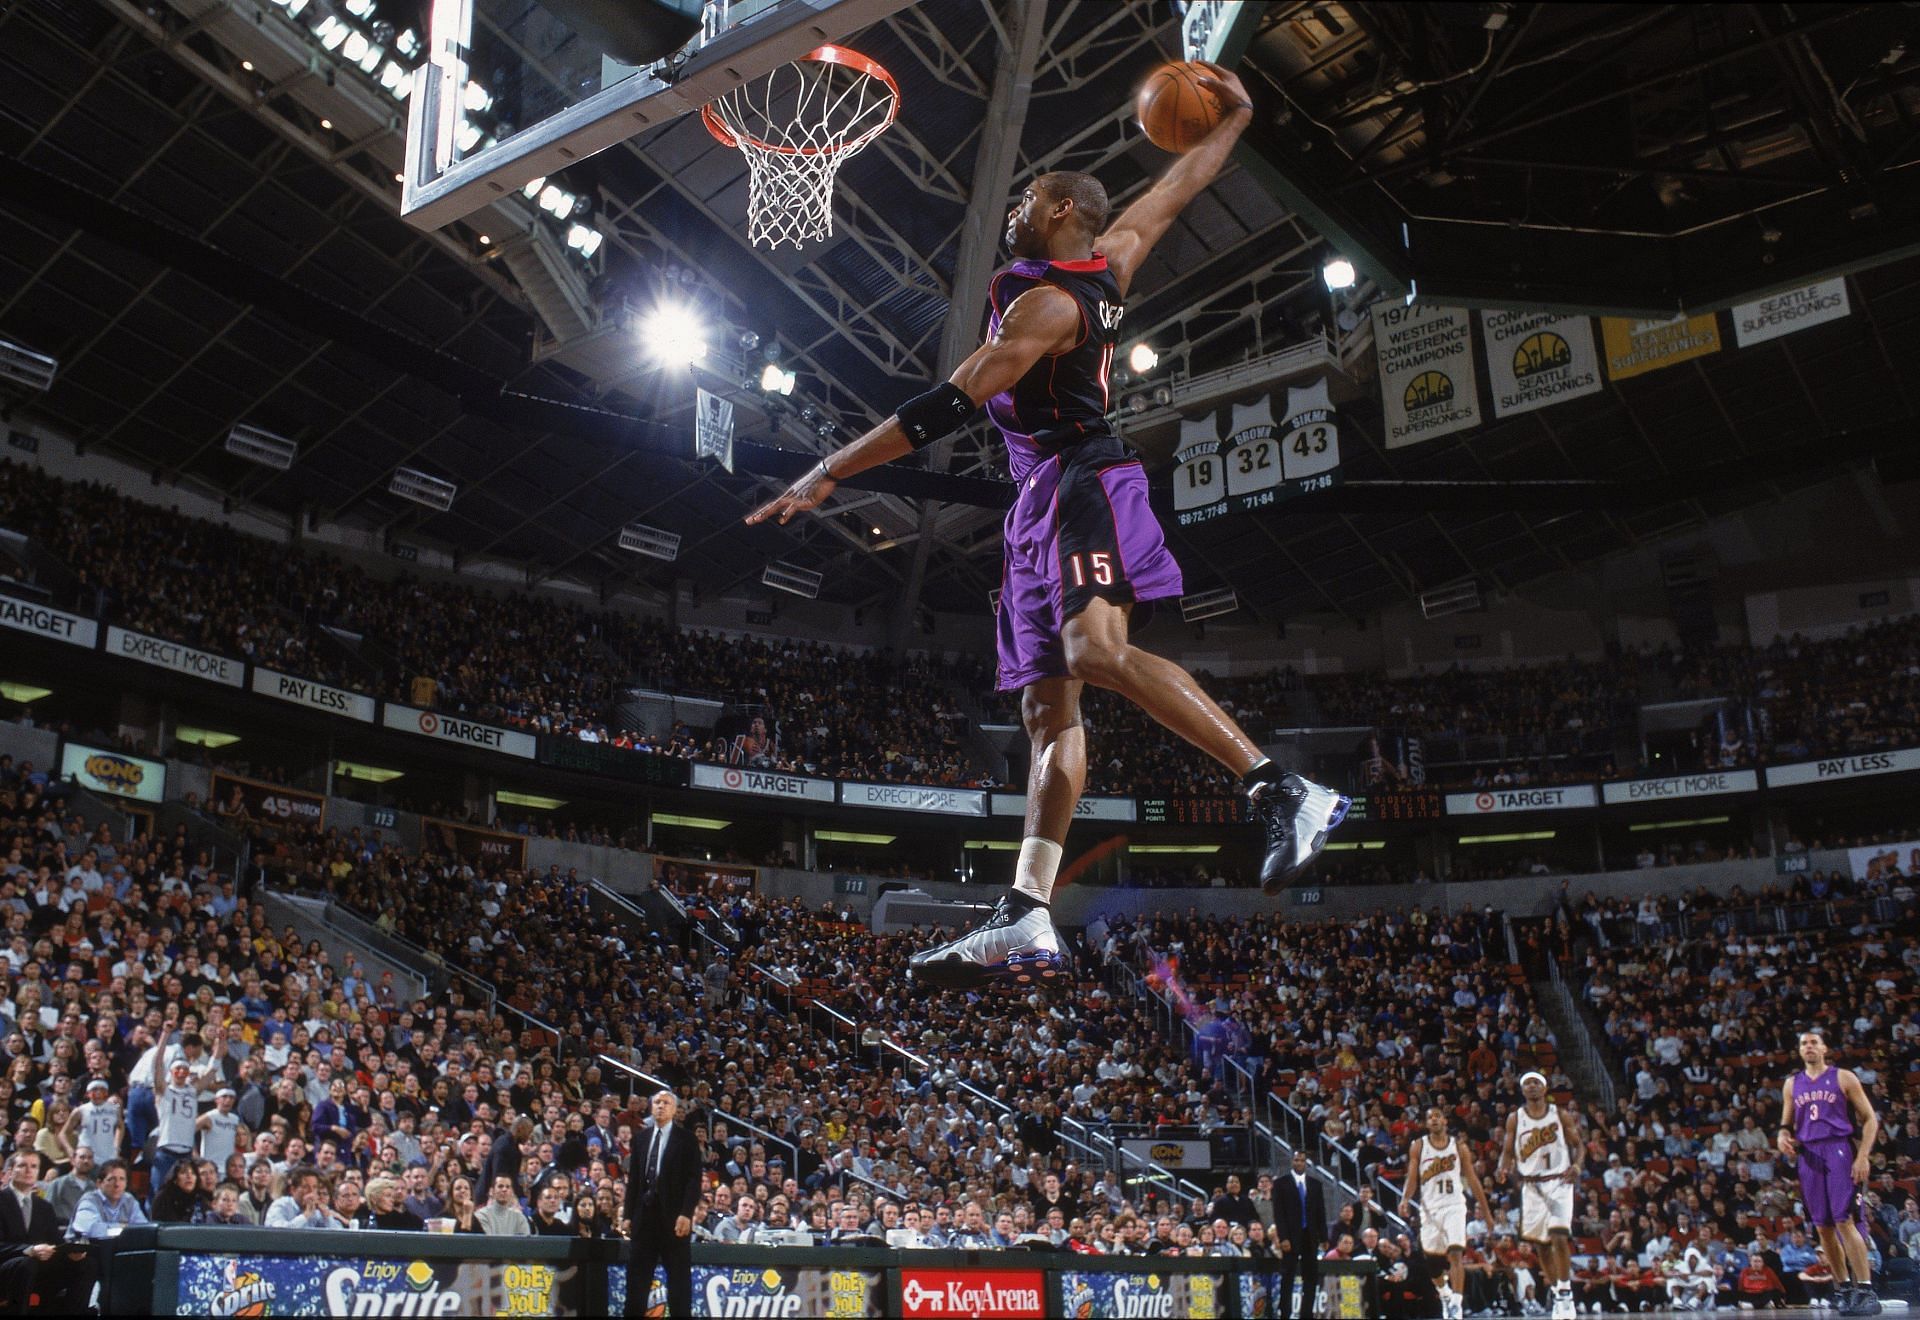 Vince Carter showing off his vertical as a member of the Toronto Raptors.